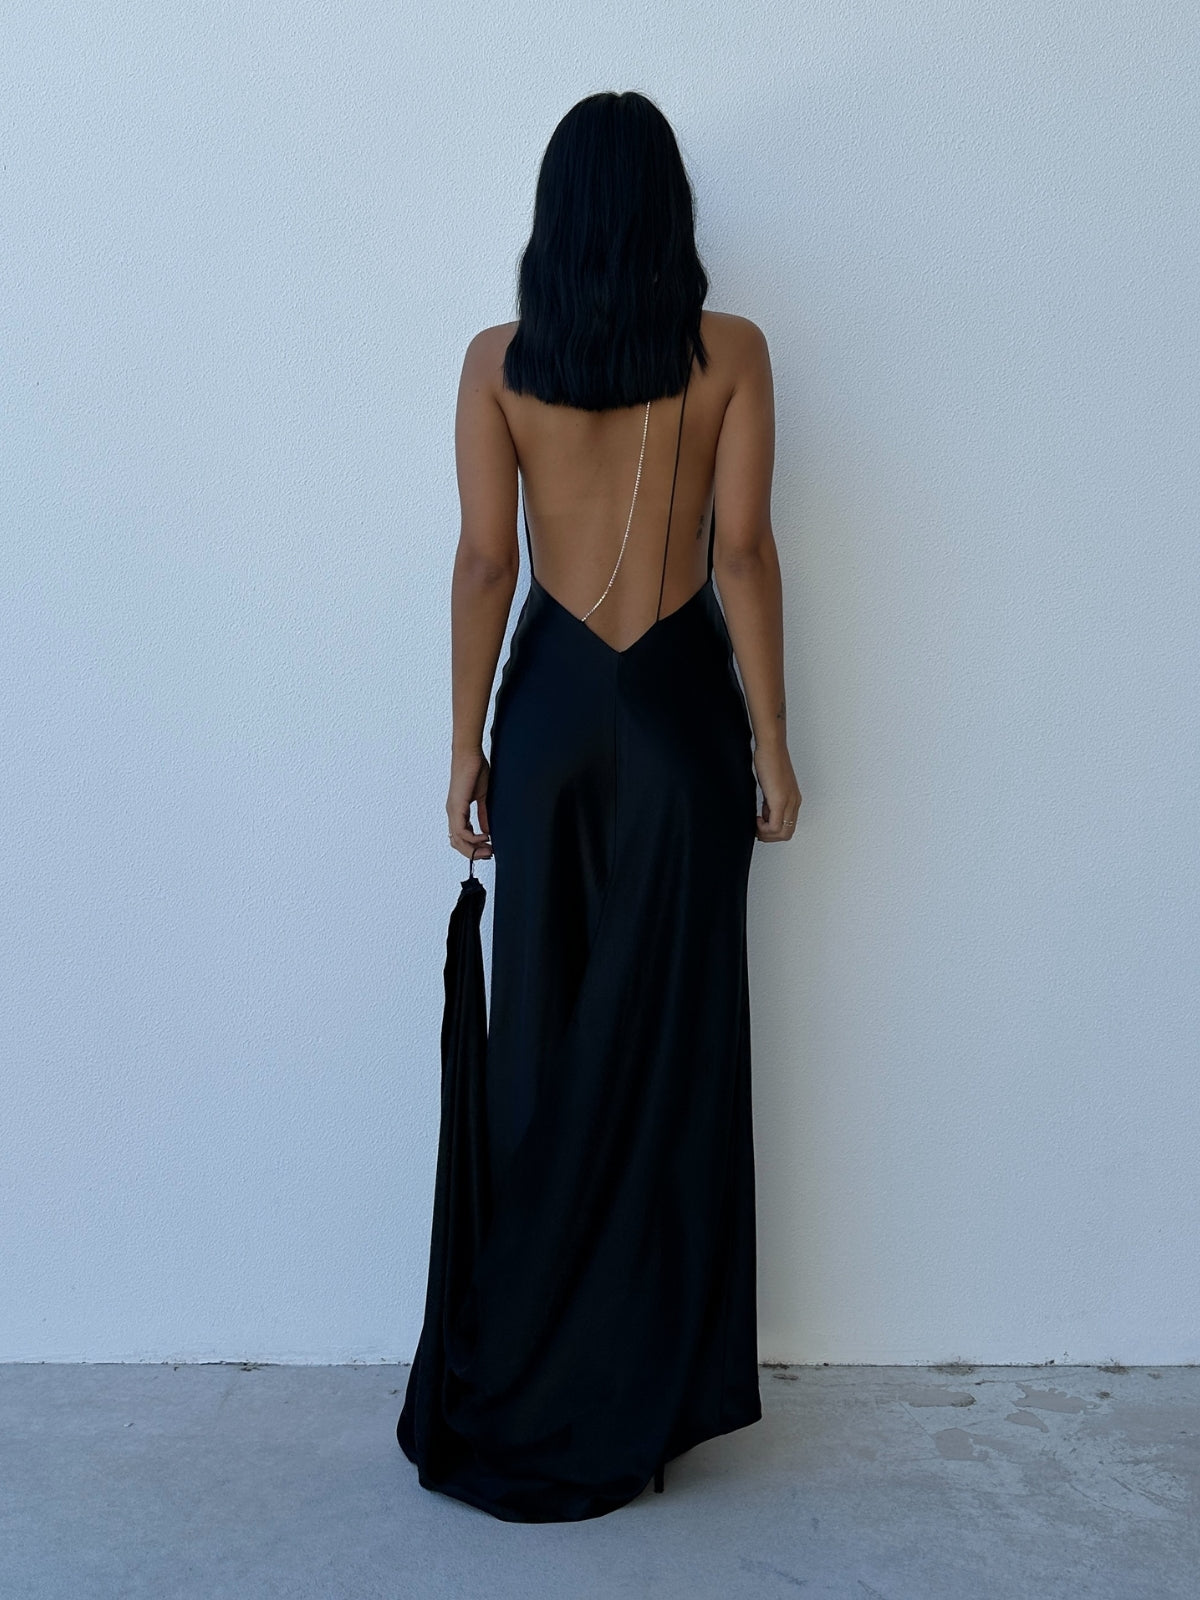 Ella Made | Beverly May Gown - Black | Loan That Label